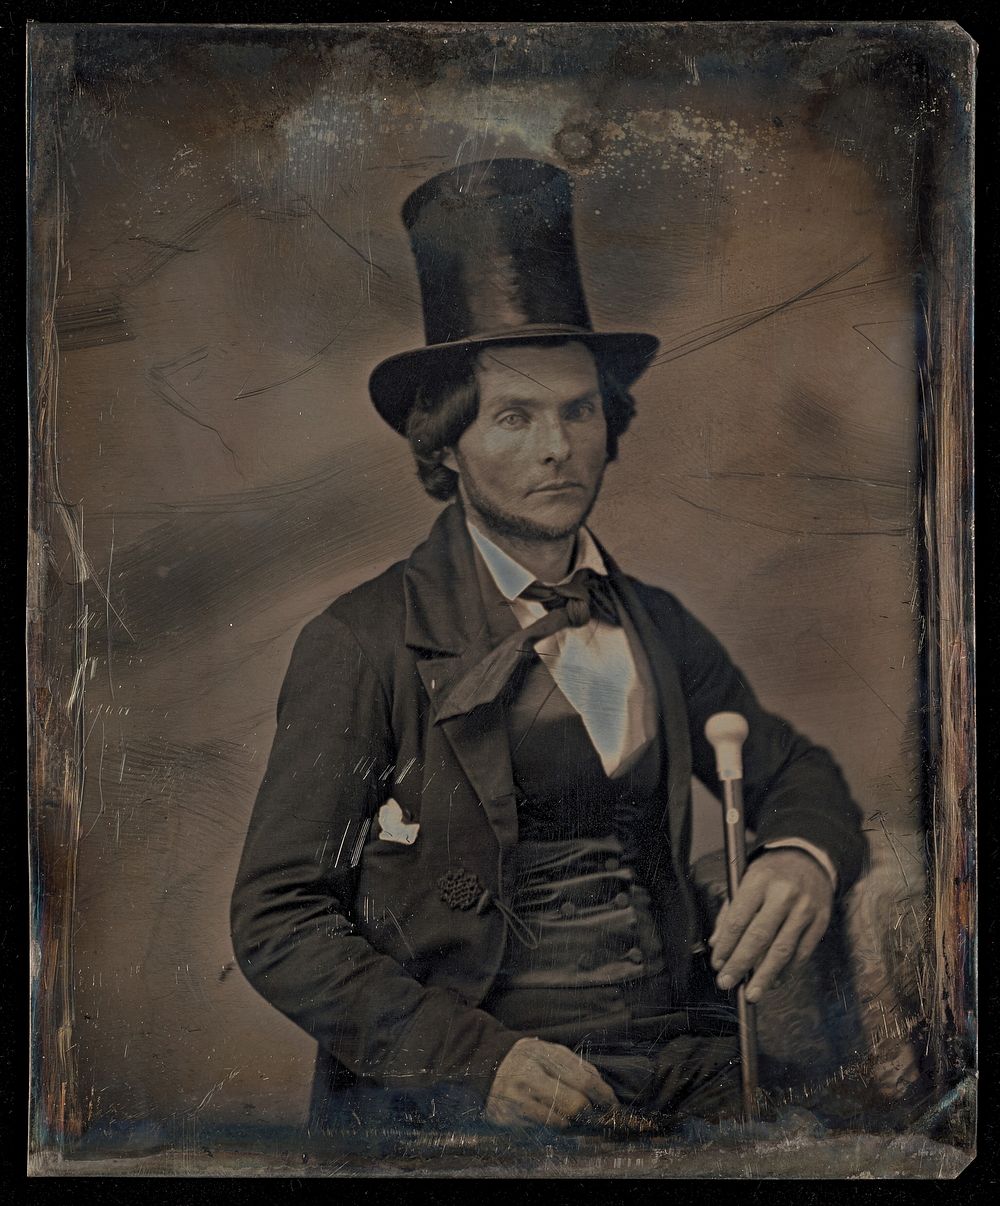 Portrait of a Seated Man with Chin Beard in Top Hat Holding Walking Stick